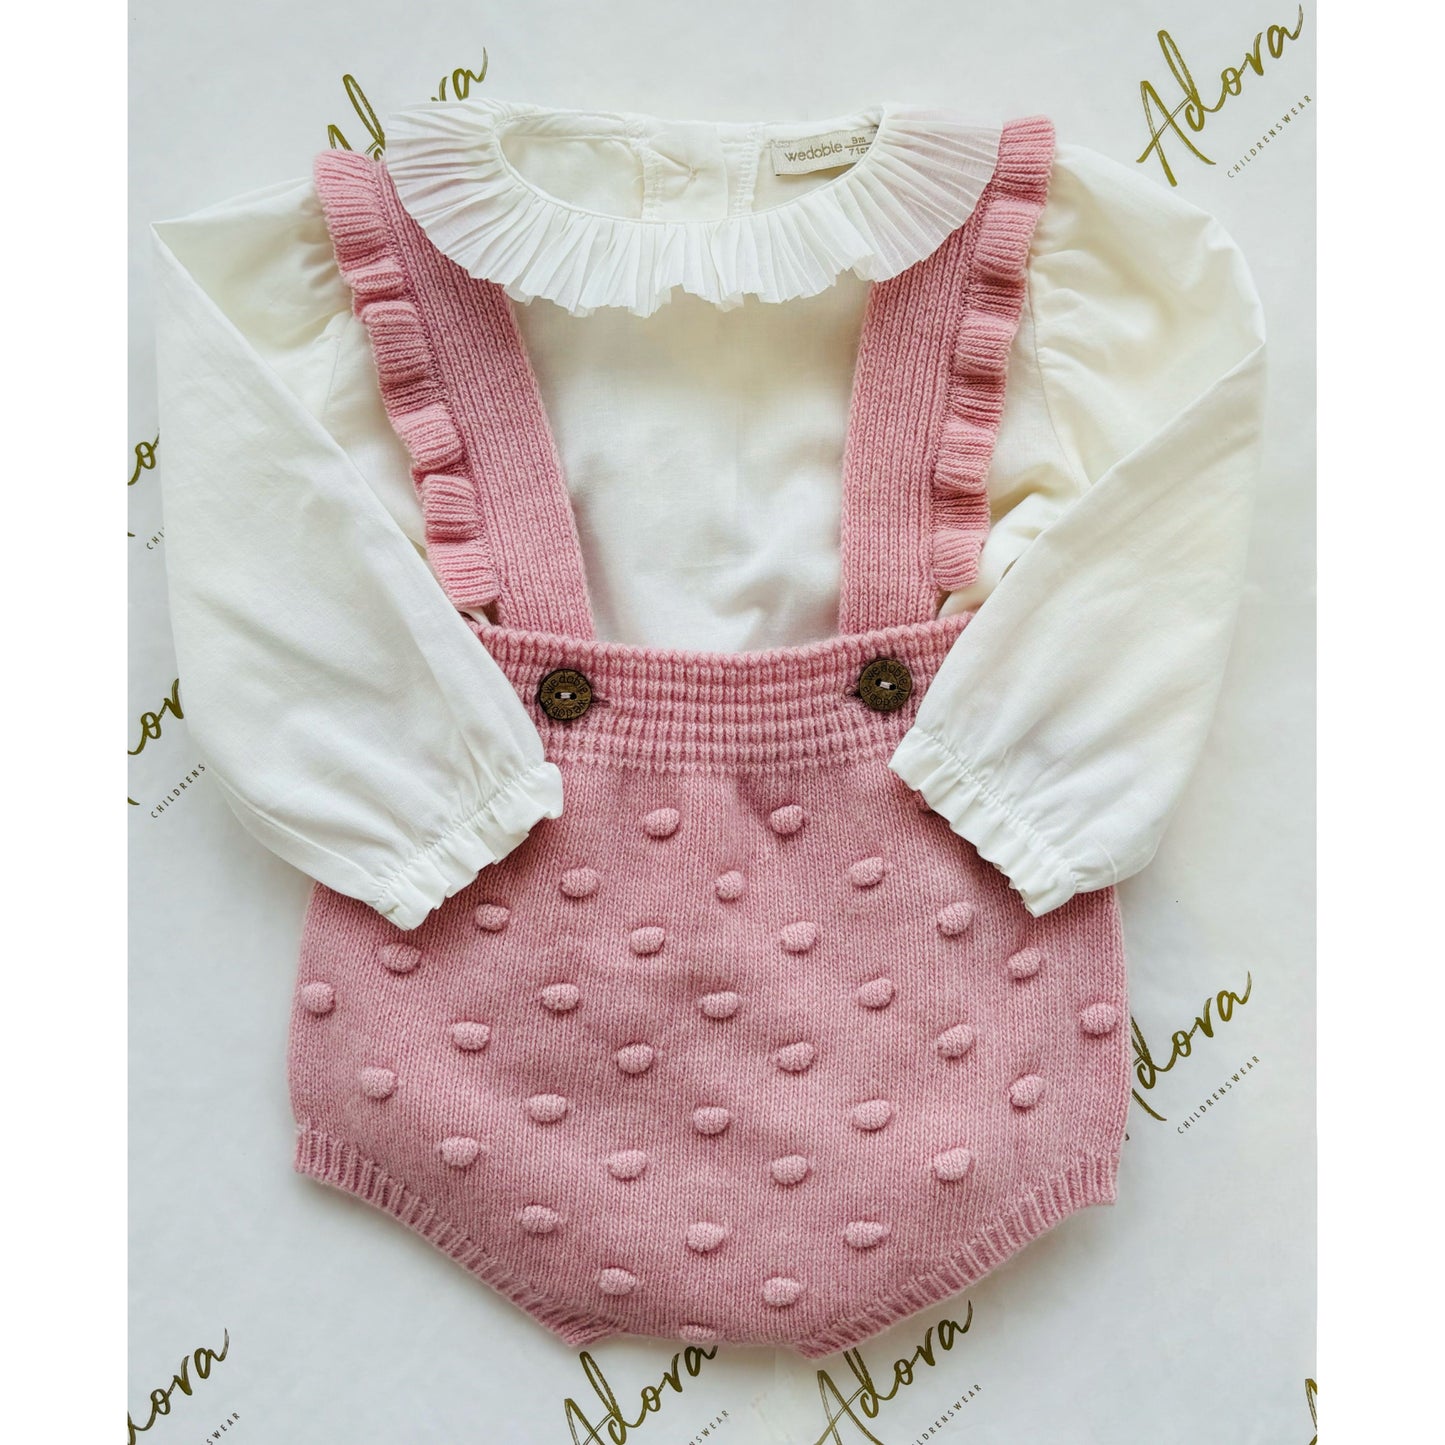 Pink knitted set for babygirls from Wedoble